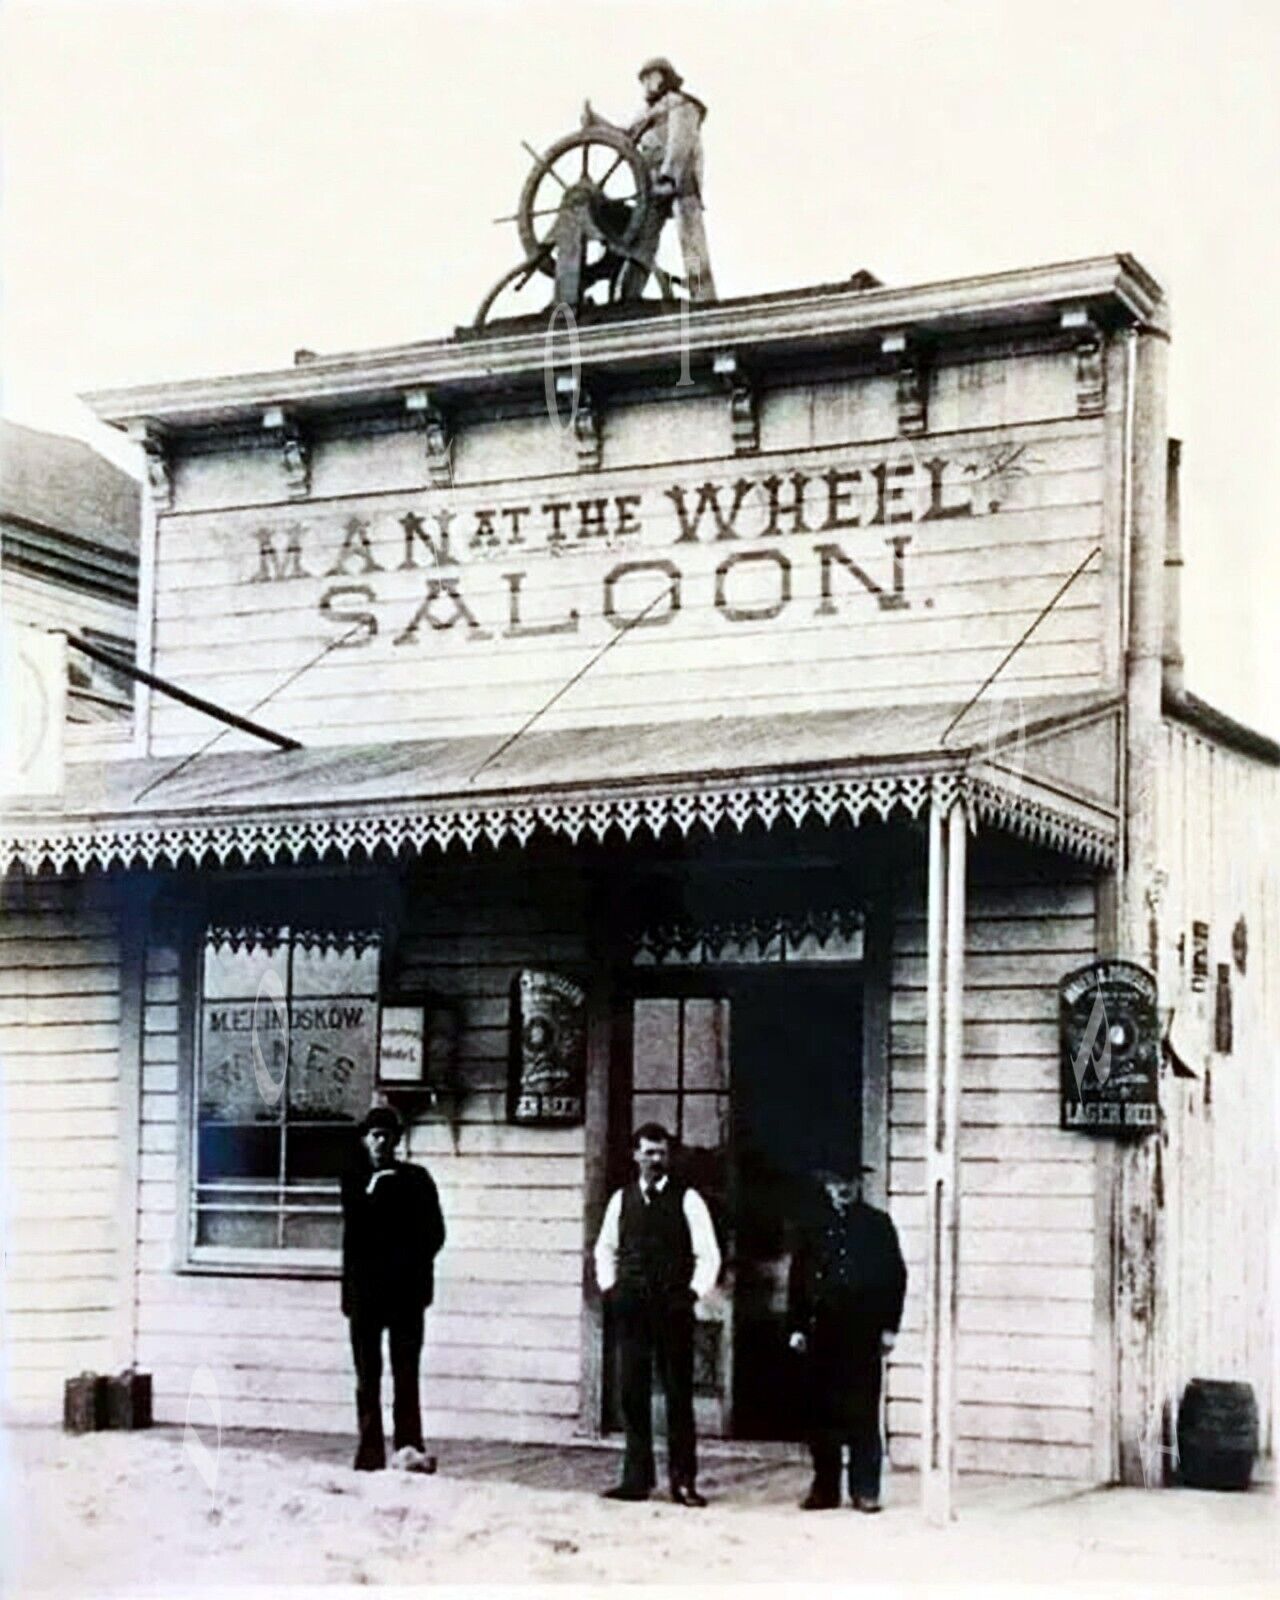 ANTIQUE OLD WEST REPRODUCTION  8X10 PHOTOGRAPH PRINT OF MAN AT THE WHEEL SALOON